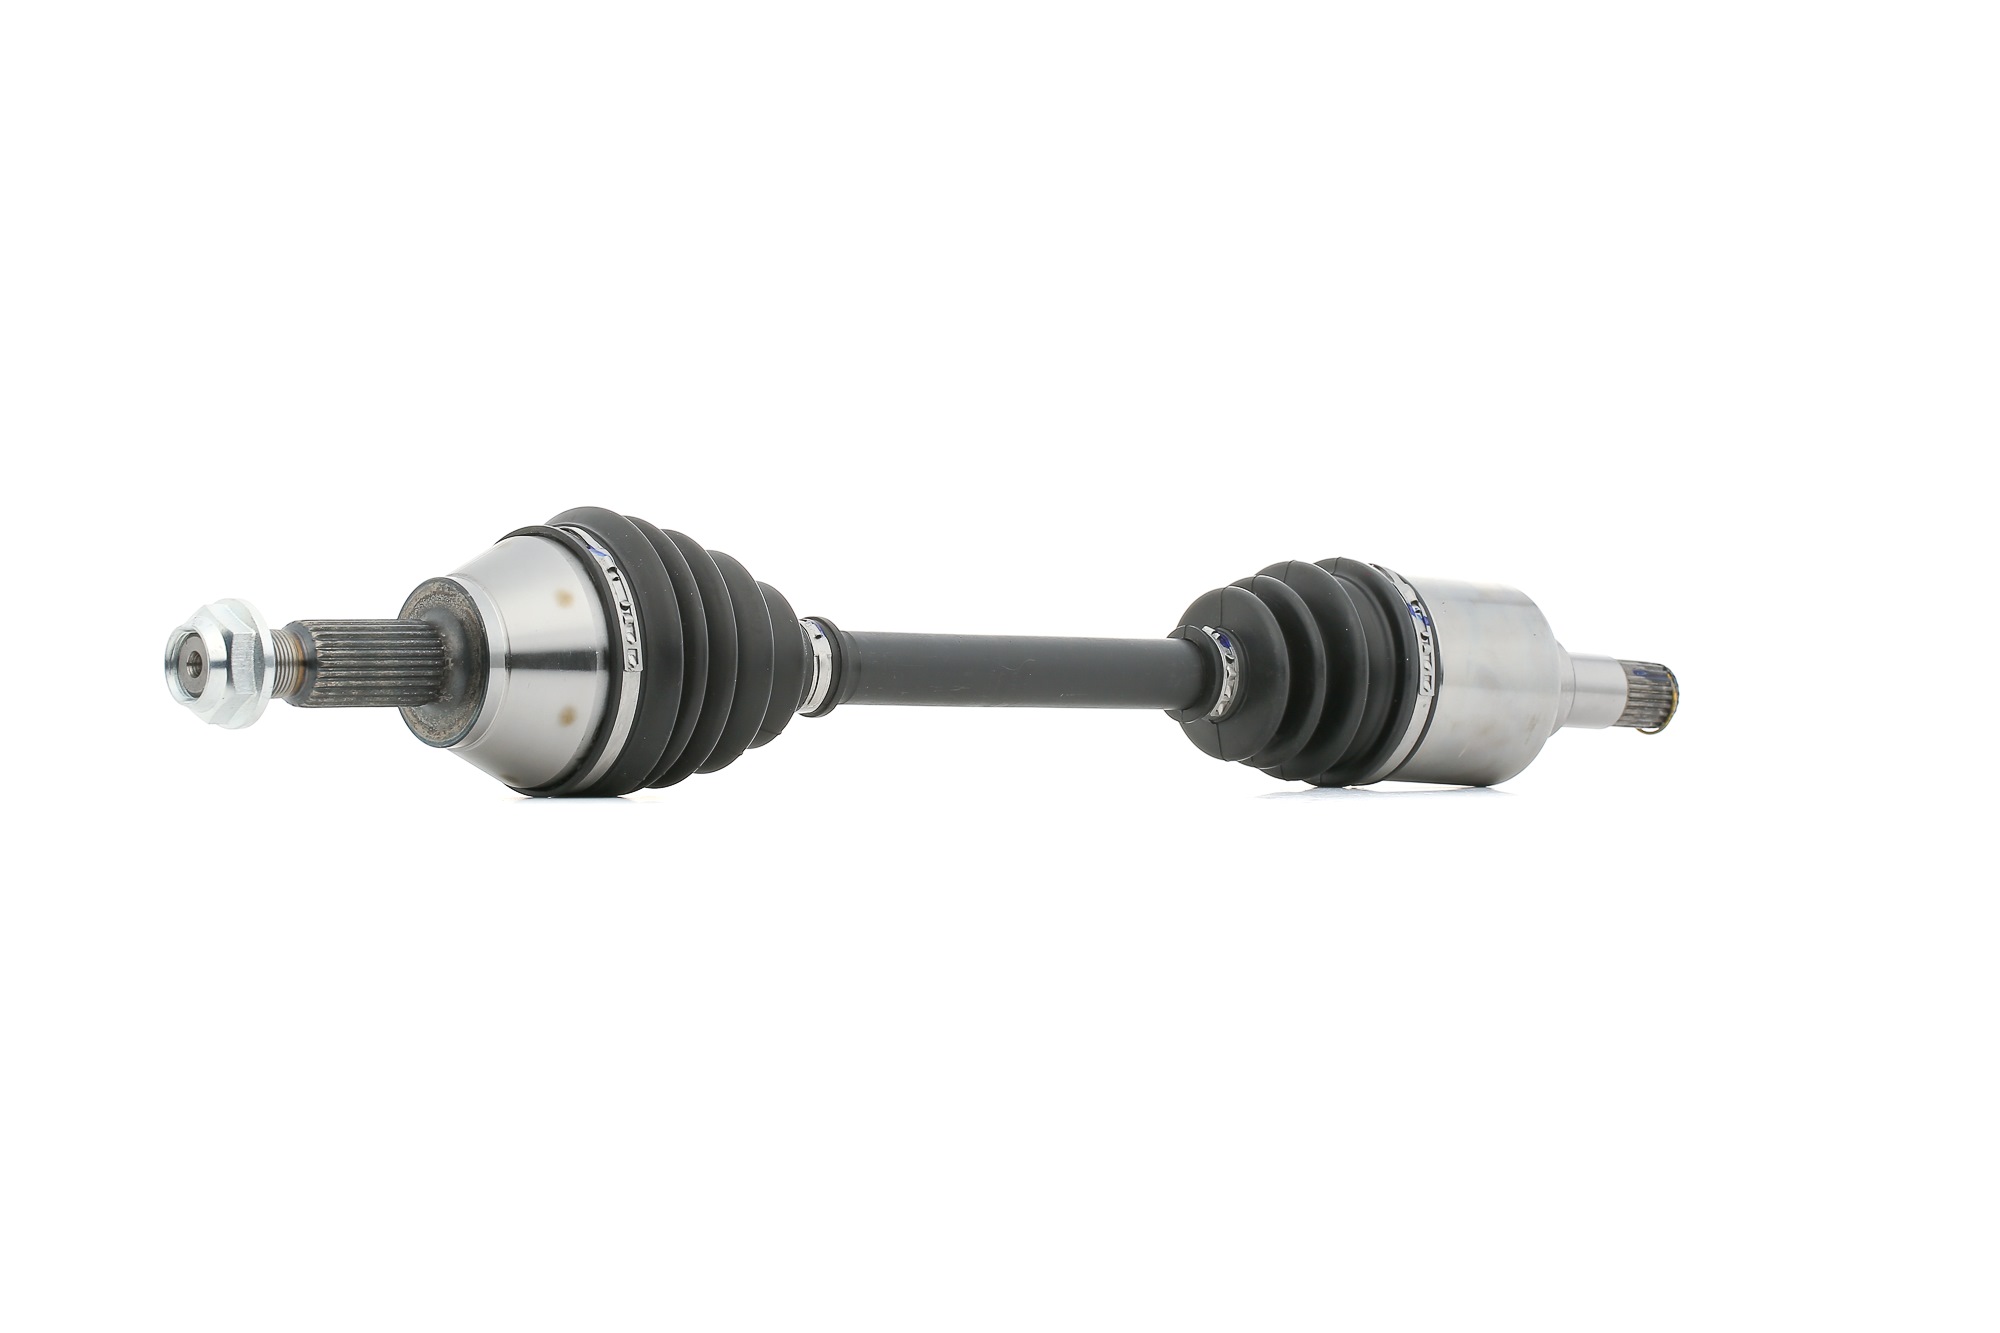 SKDS-0210442 STARK CV axle FORD Front Axle Left, 616, 61mm